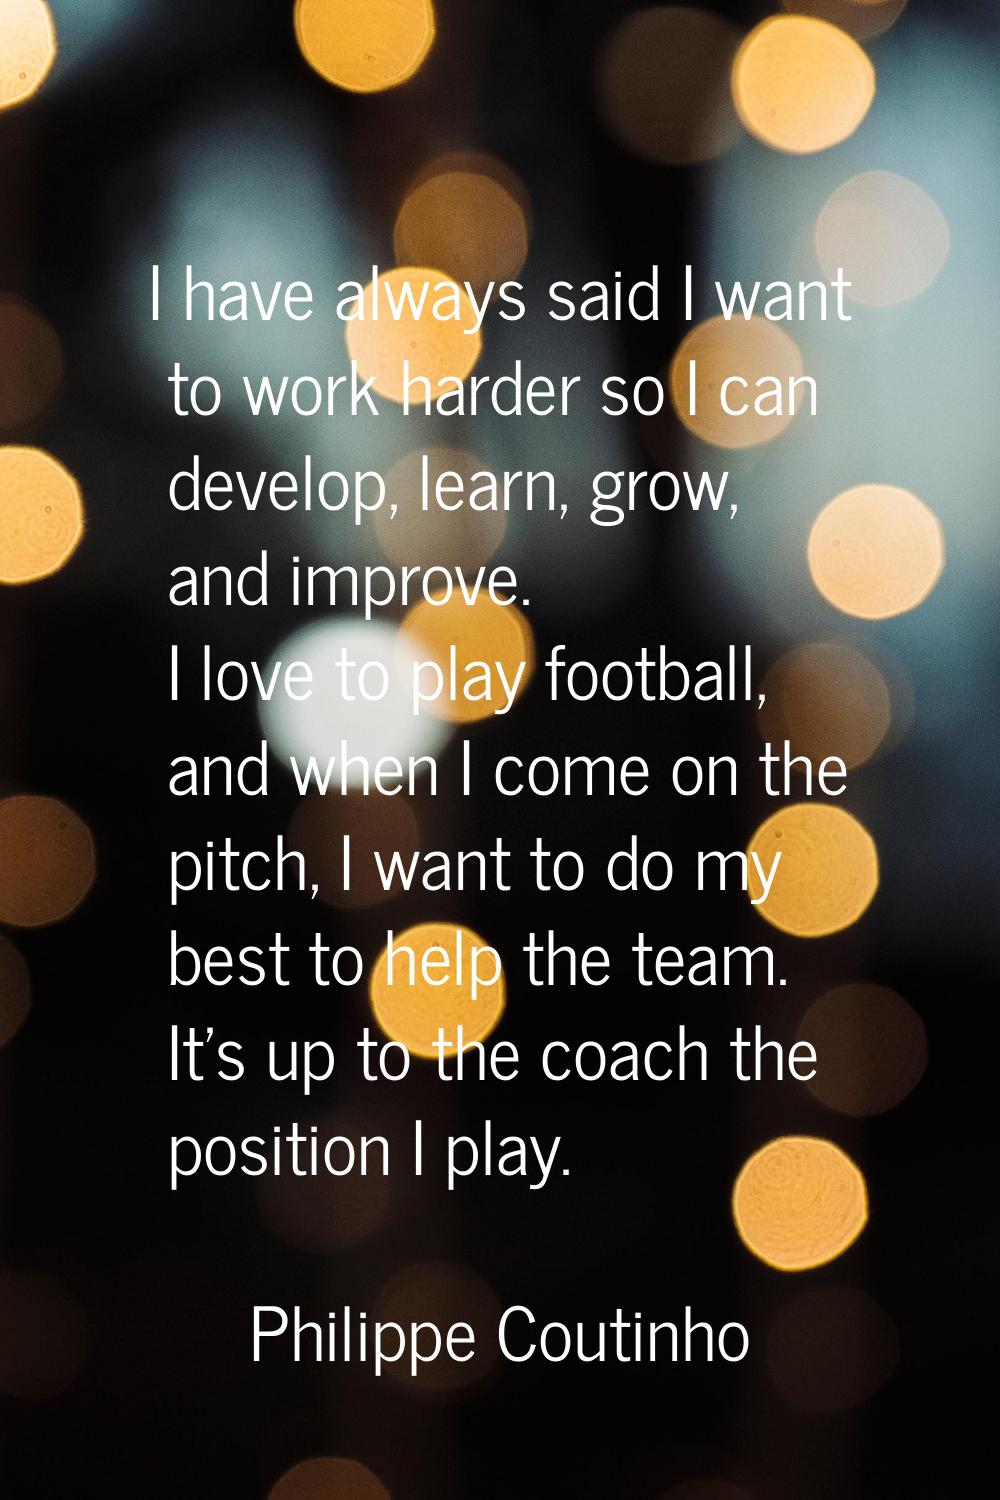 I have always said I want to work harder so I can develop, learn, grow, and improve. I love to play